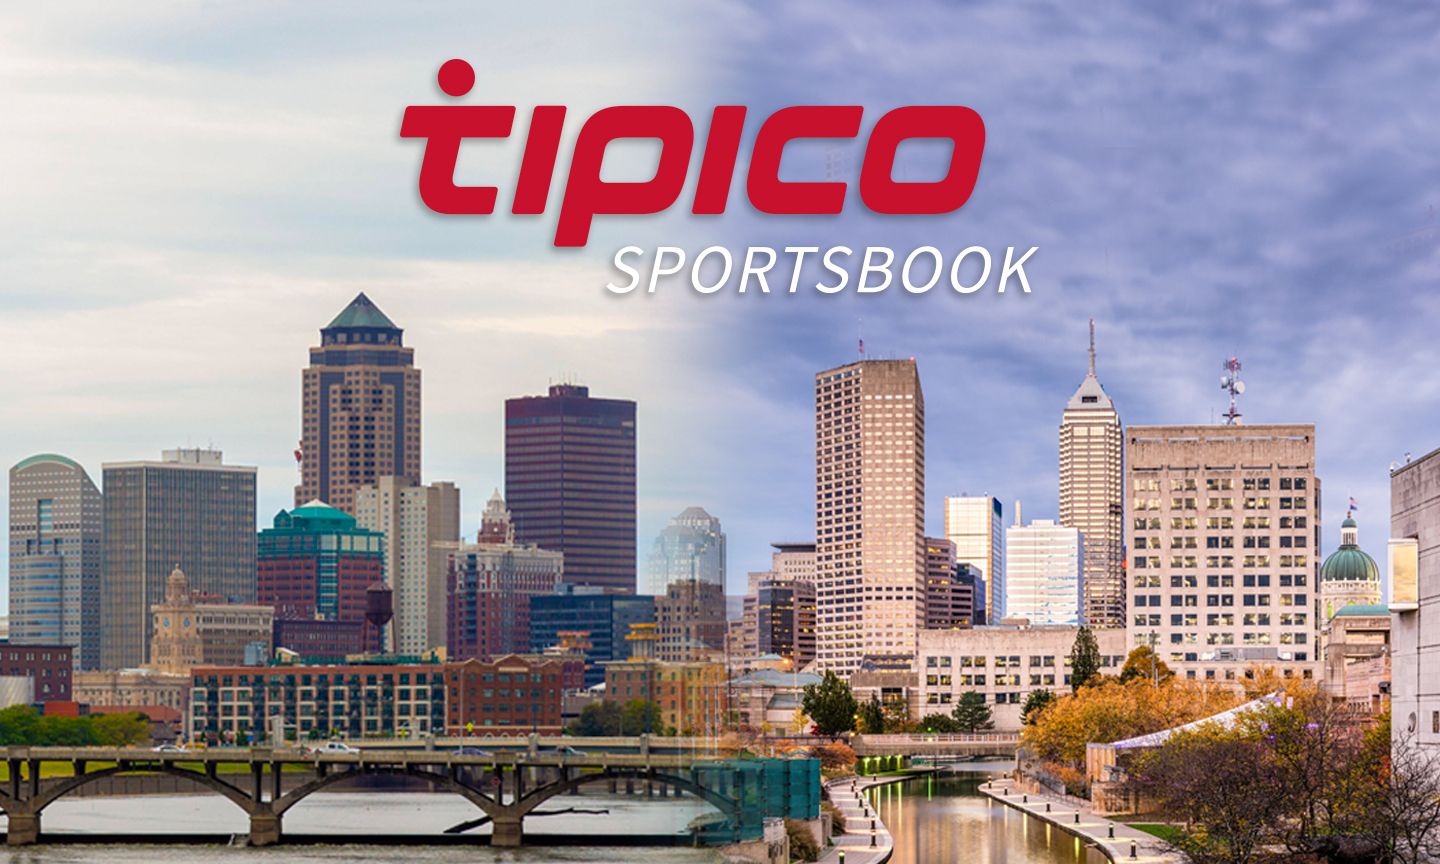 Fanatics Could Move To Buy Tipico, According To Reports